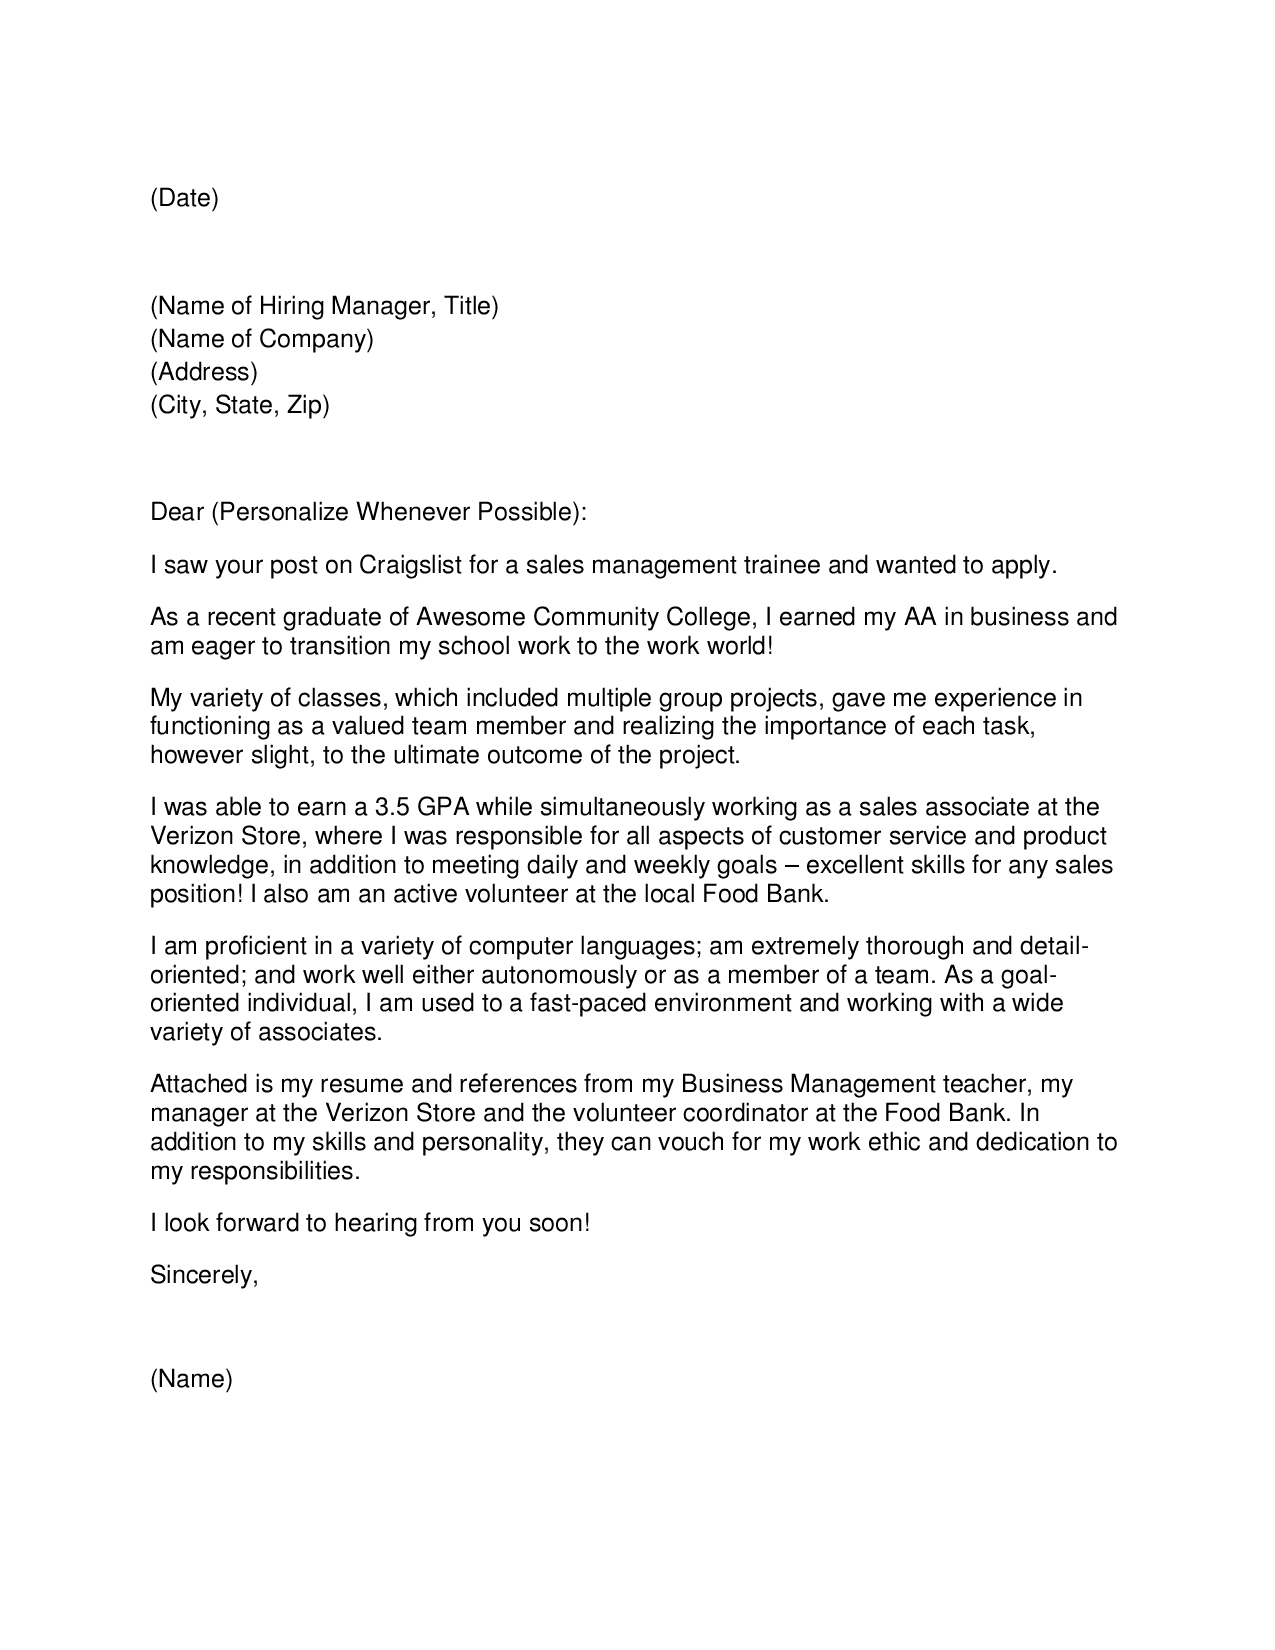 Sample cover letter for consulting job